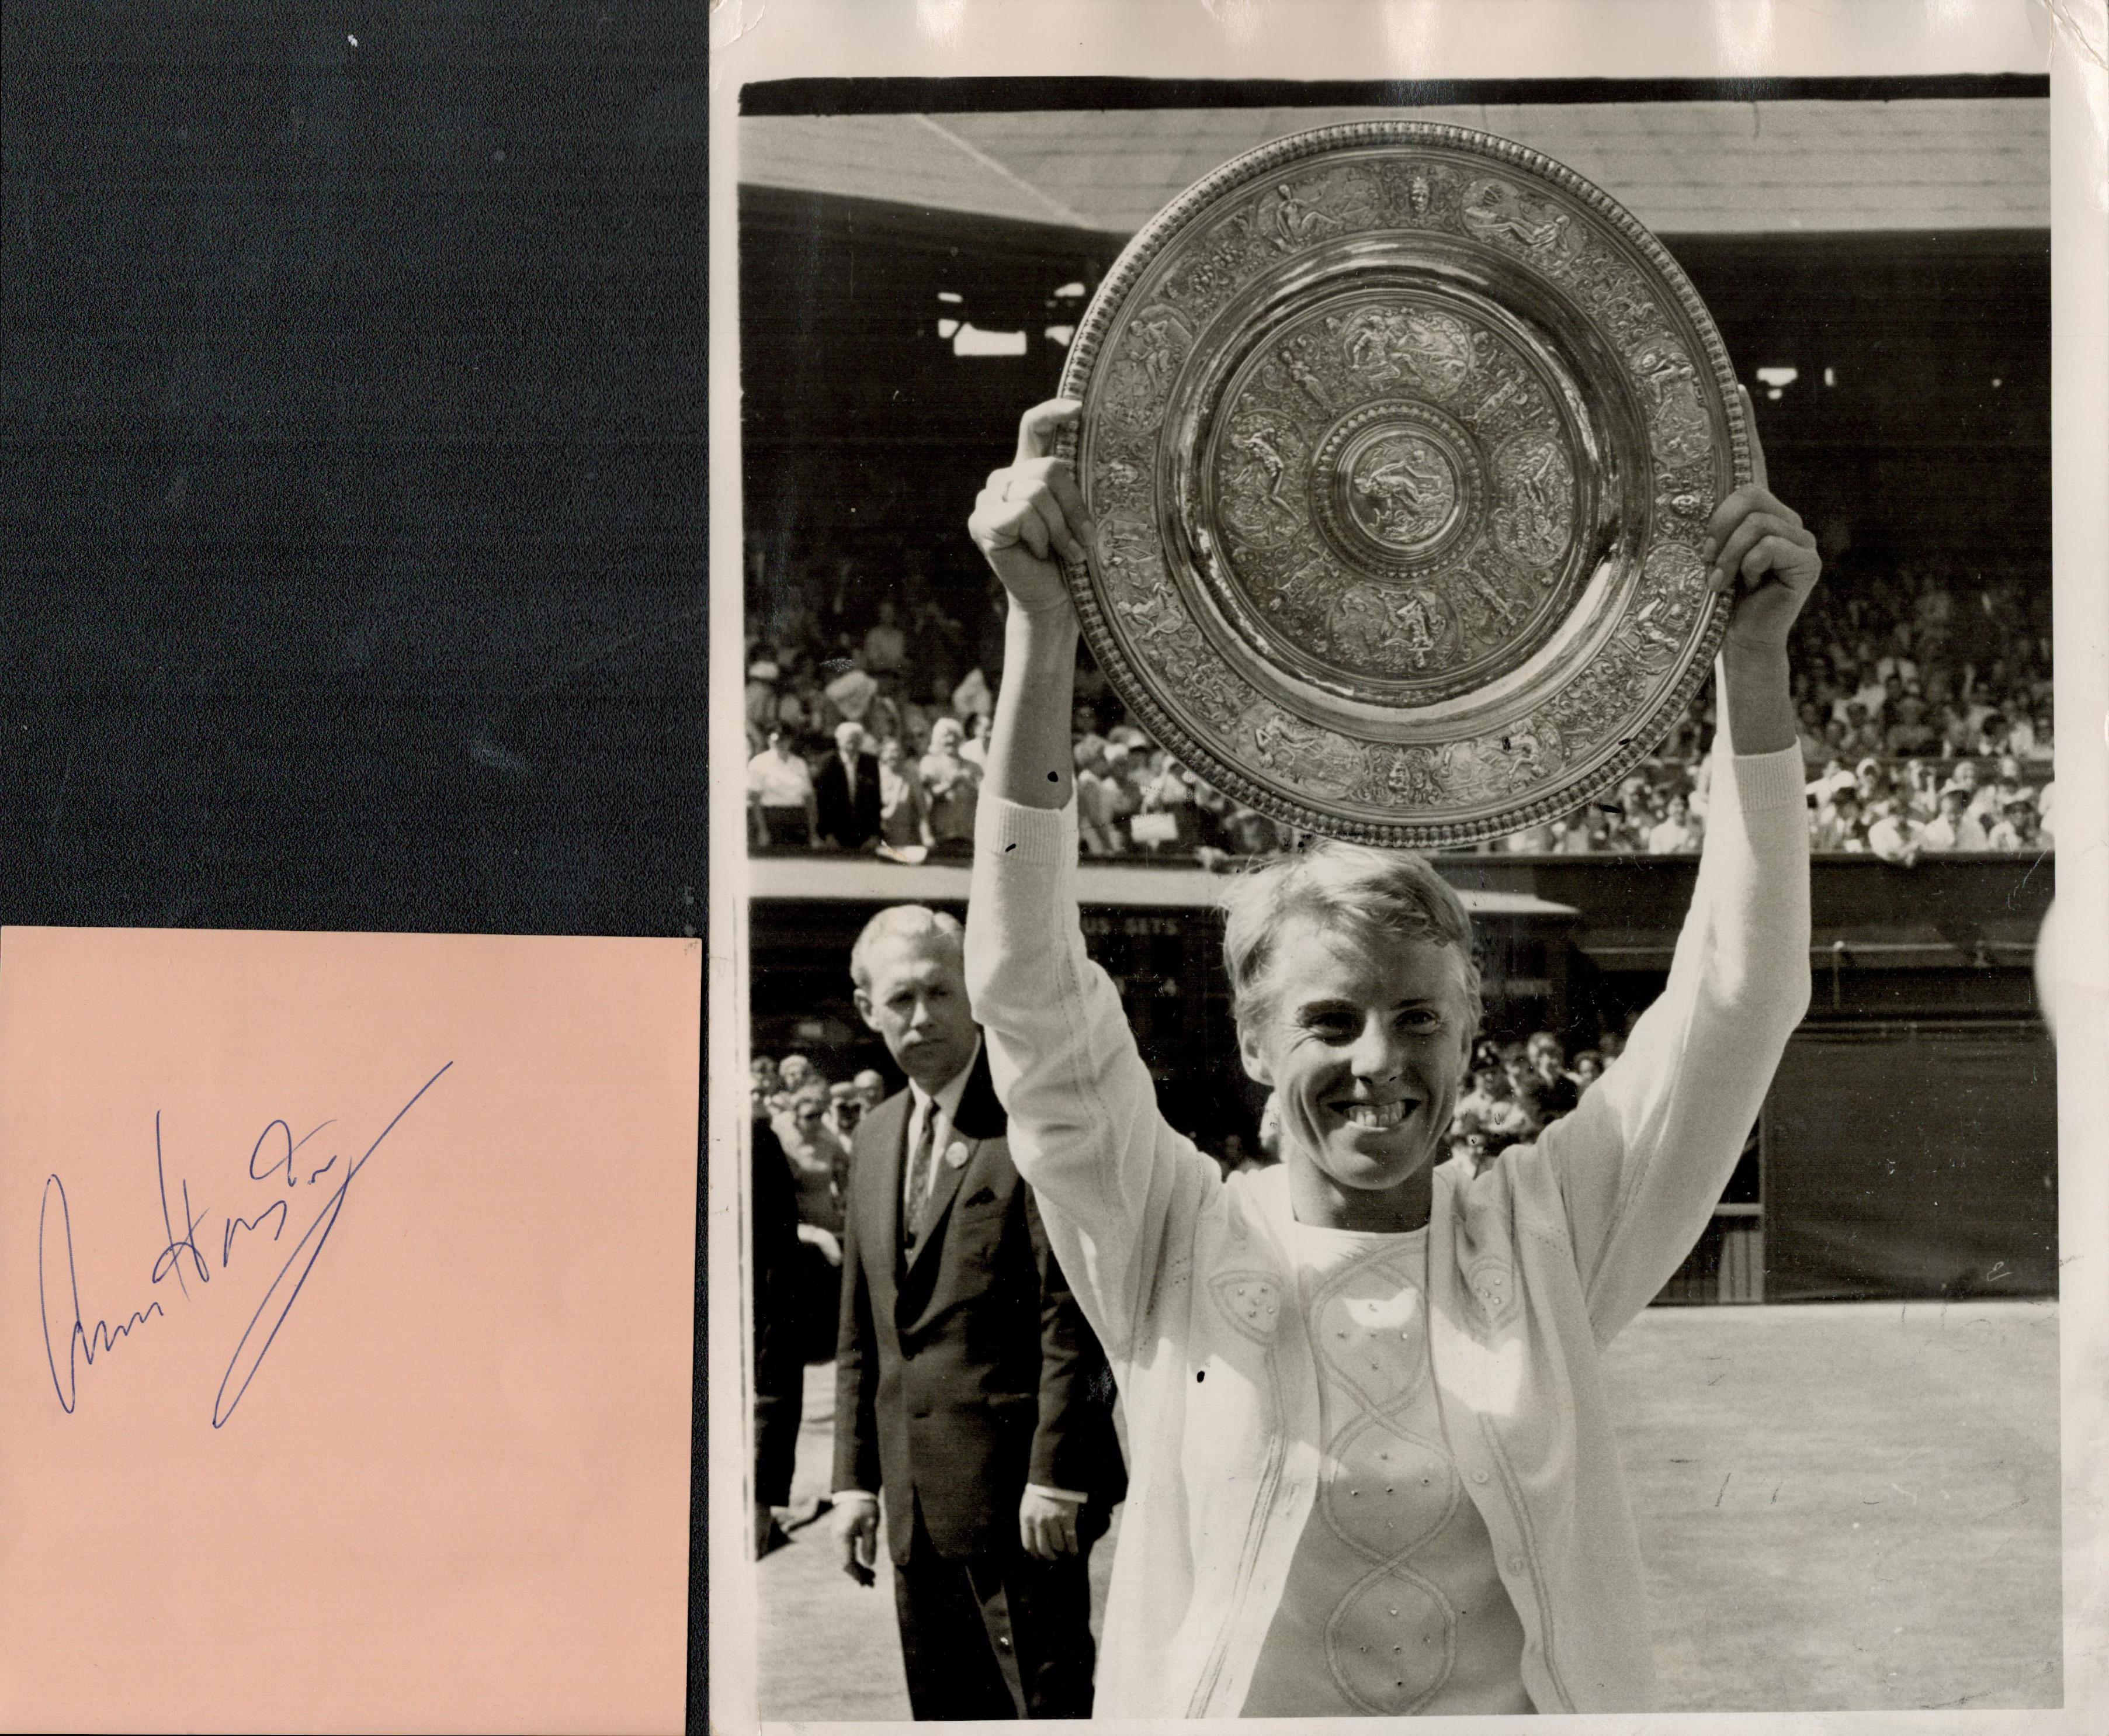 Tennis Anne Jones signed 5x4 album page and 10x8 vintage black and white photo. Good condition.